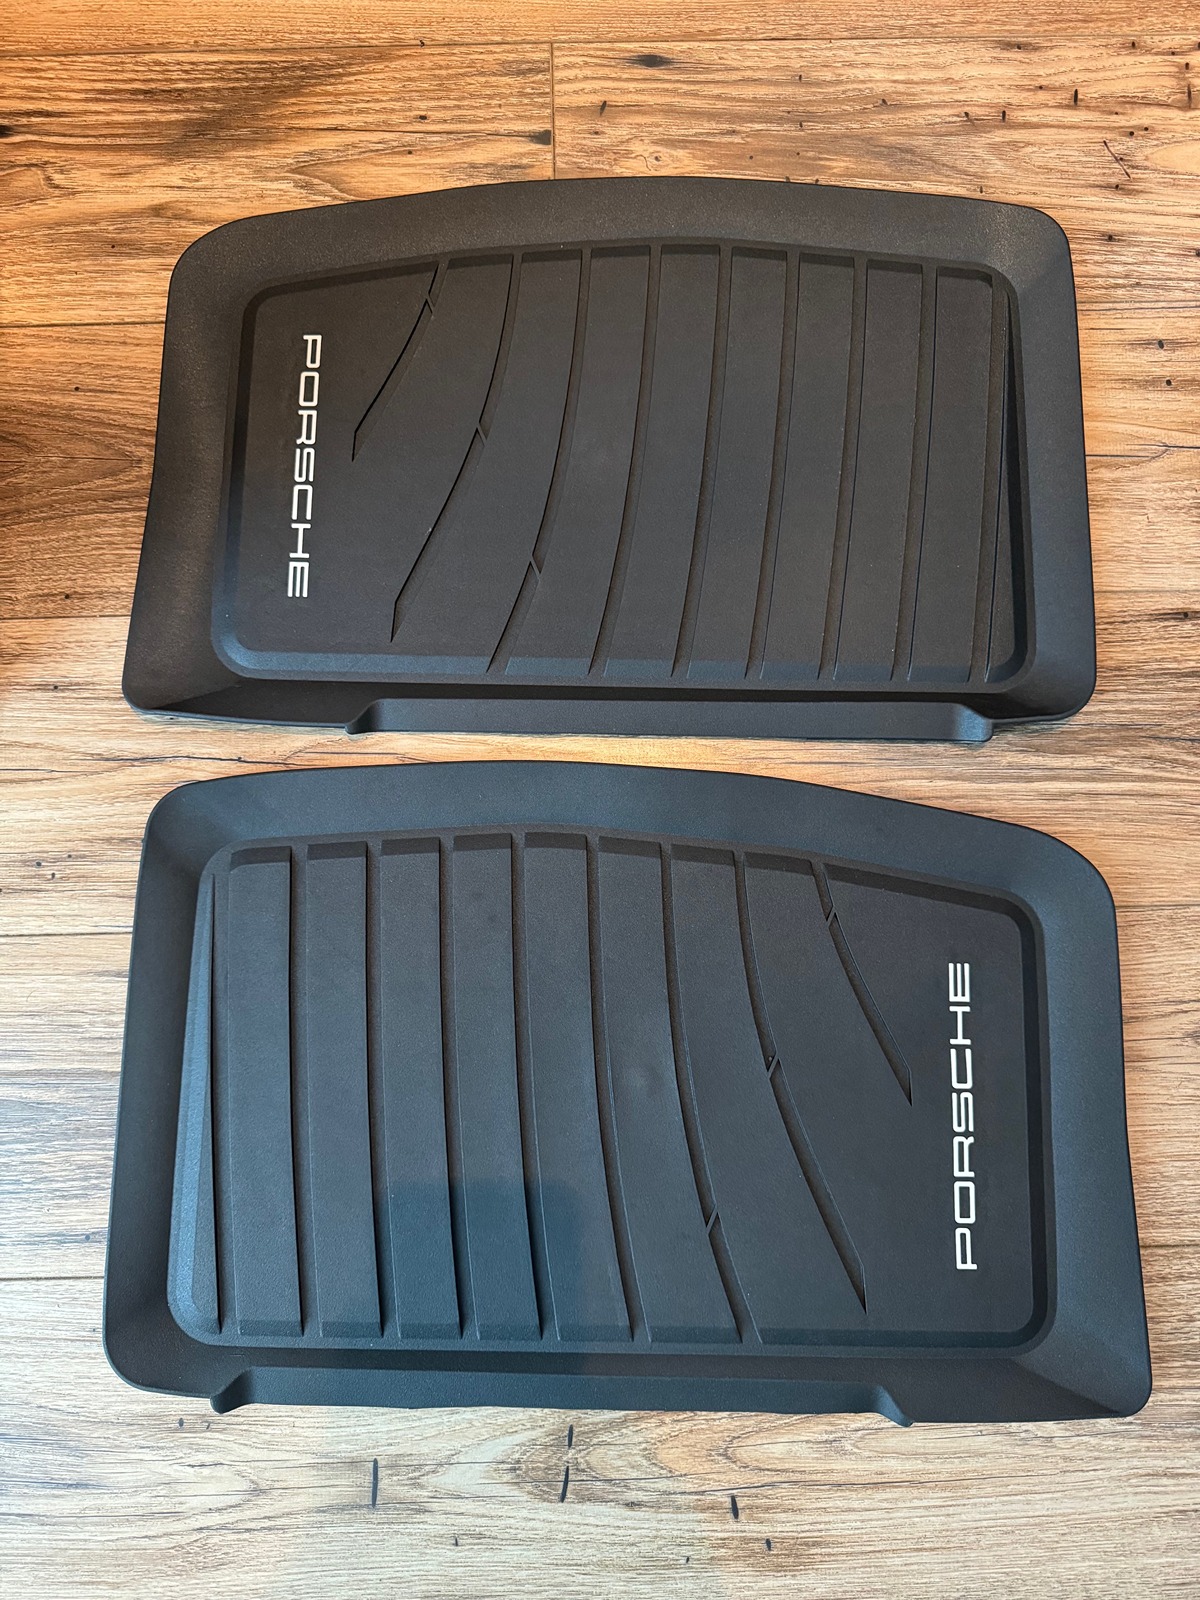 Porsche Taycan SOLD: Barely used black rubber/all weather floor mats floormat set for Taycan, $120 03_rear_mats